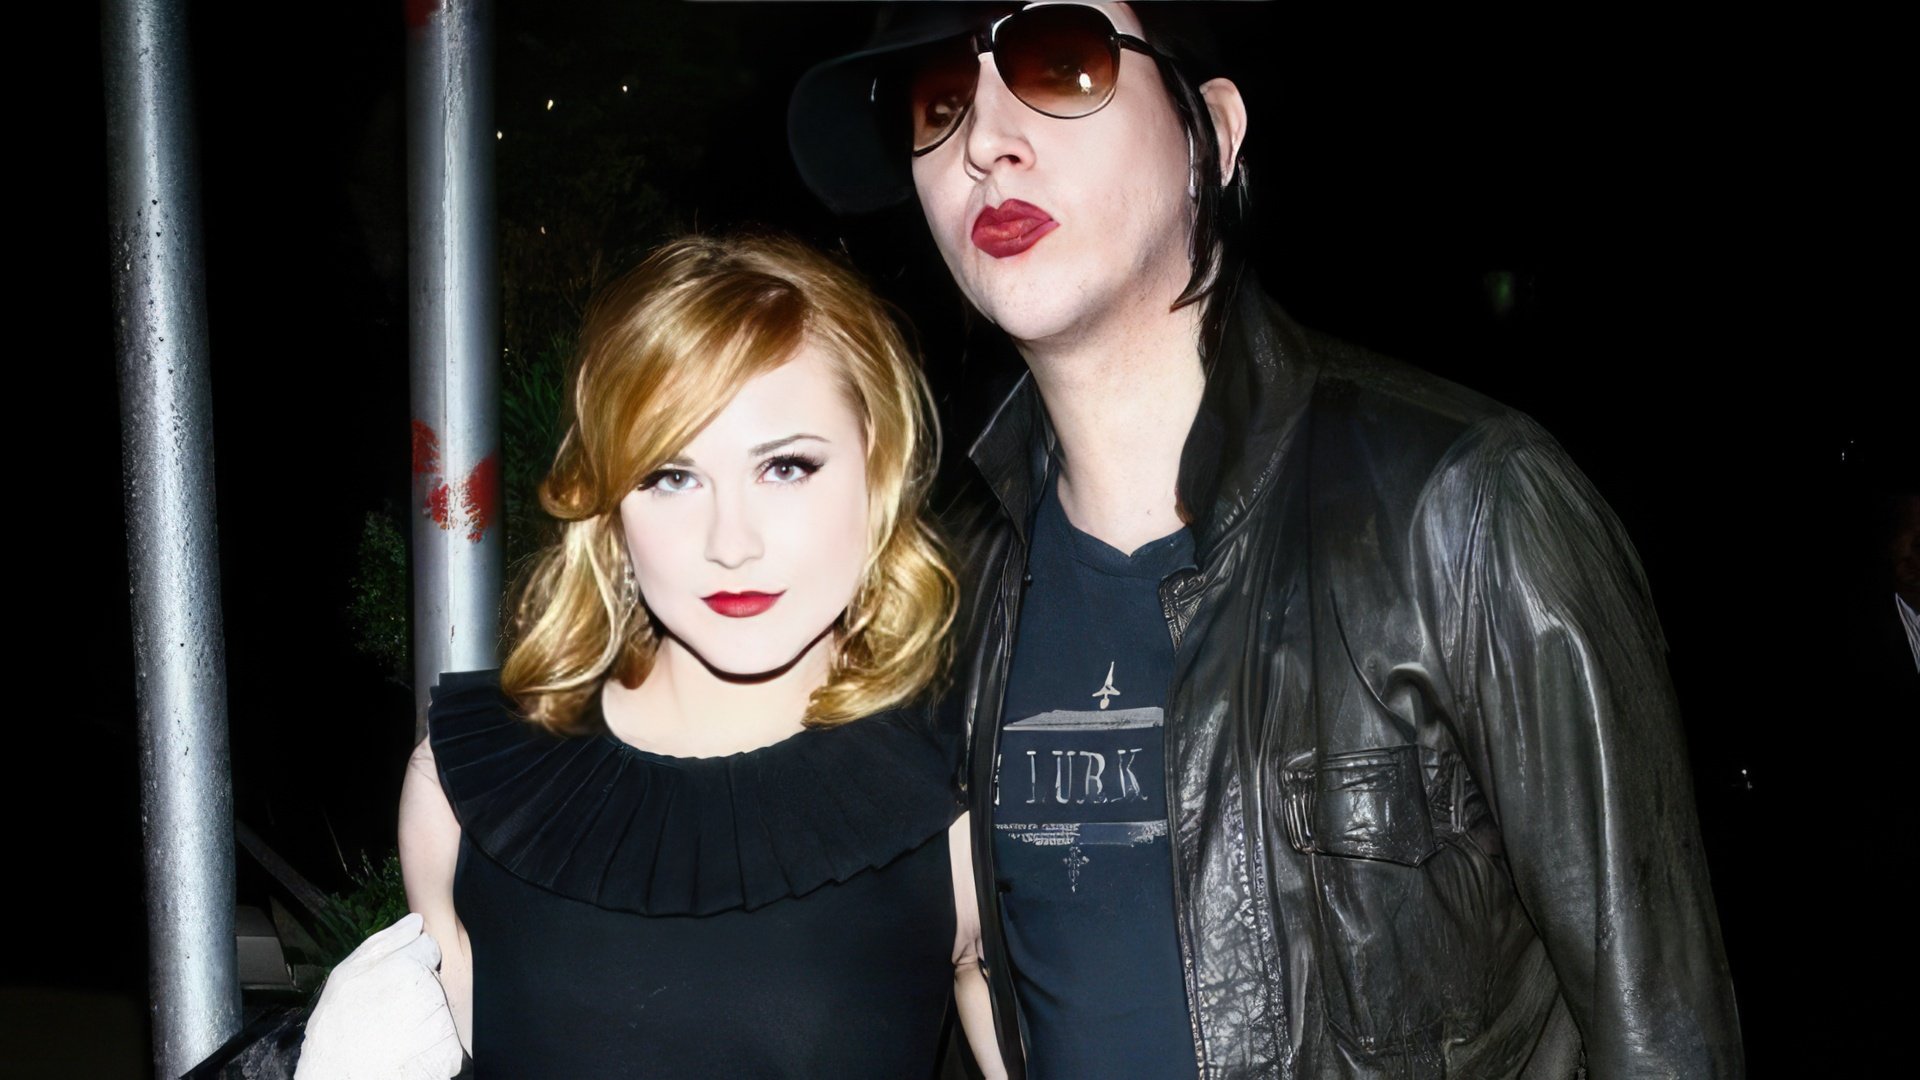 Evan Rachel Wood and Marylin Manson were betrothed